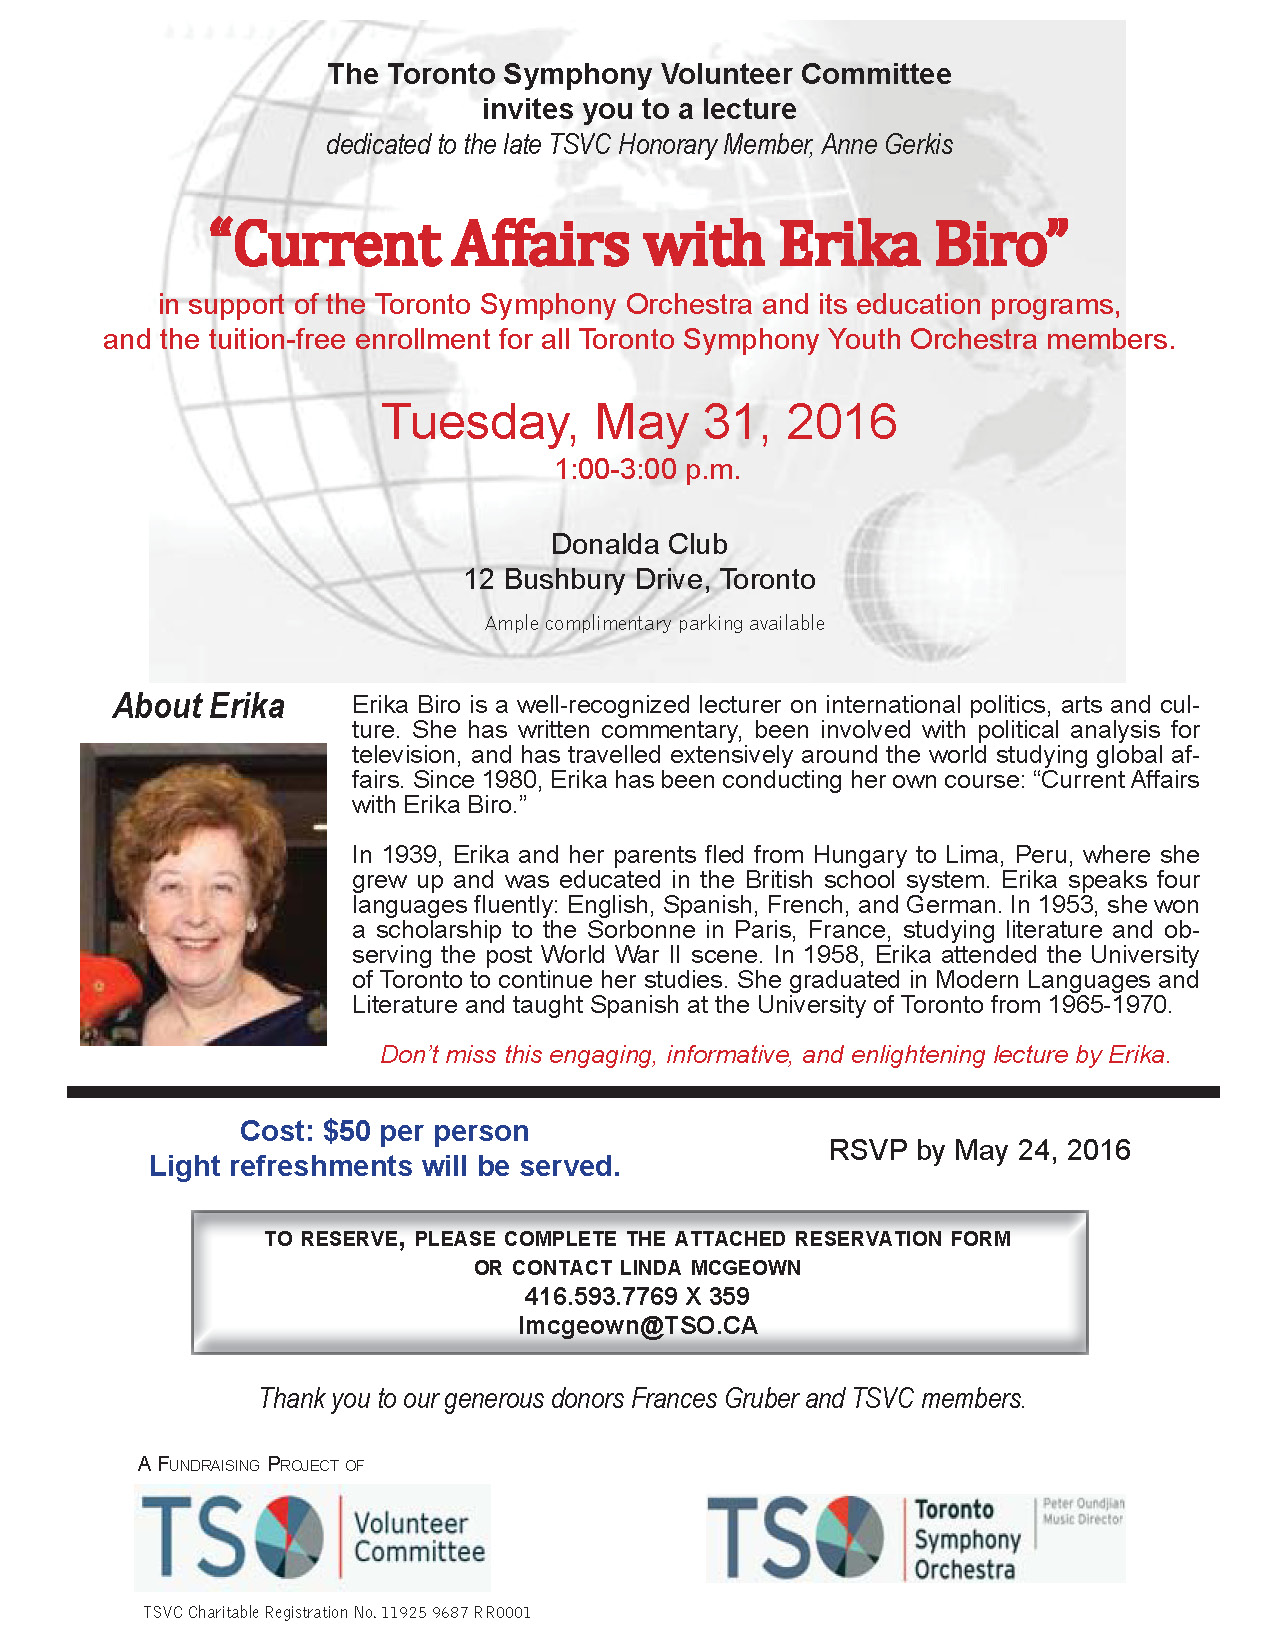 Lecture May 31, 2016 with Erika Biro - flyer - jpeg